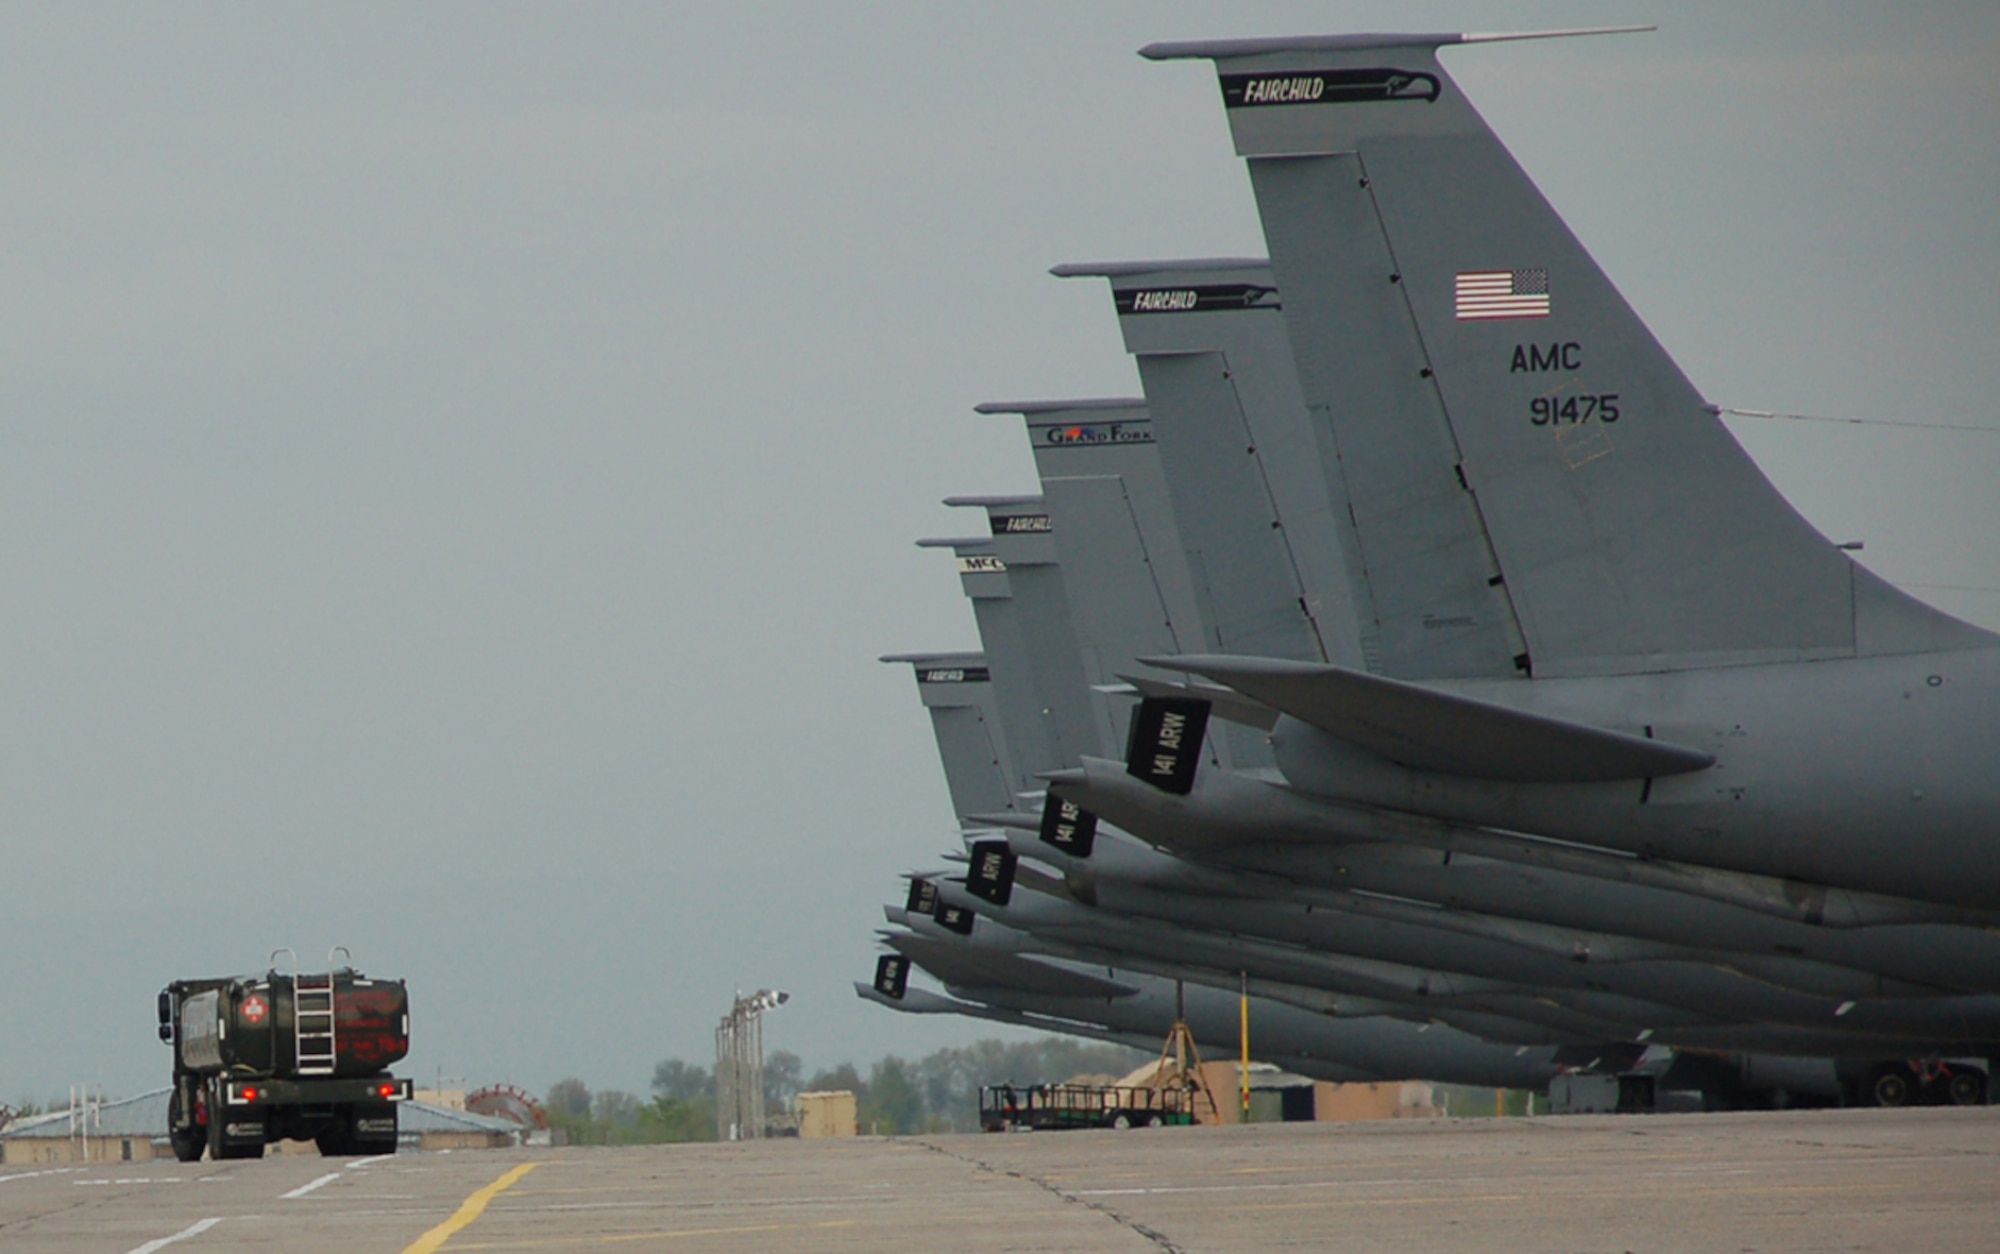 An R-11 refueler truck passes by a line of KC-135 Stratotankers on the flightline at Manas Air Base, Kyrgyzstan, May 2. Every day, the 376th Expeditionary Logistics Readiness Fuels Management Flight pumps out between 200,000 to 350,000 gallons to keep missions flying in support of Operation Enduring Freedom in Afghanistan. One R-11 can hold up to 6,000 gallons of TS1 jet fuel. A KC-135 holds about 200,000 gallons of jet fuel that the tanker offloads to a variety of aircraft in the sky over Afghanistan. (U.S. Air Force photo/Tech. Sgt. Phyllis Hanson)